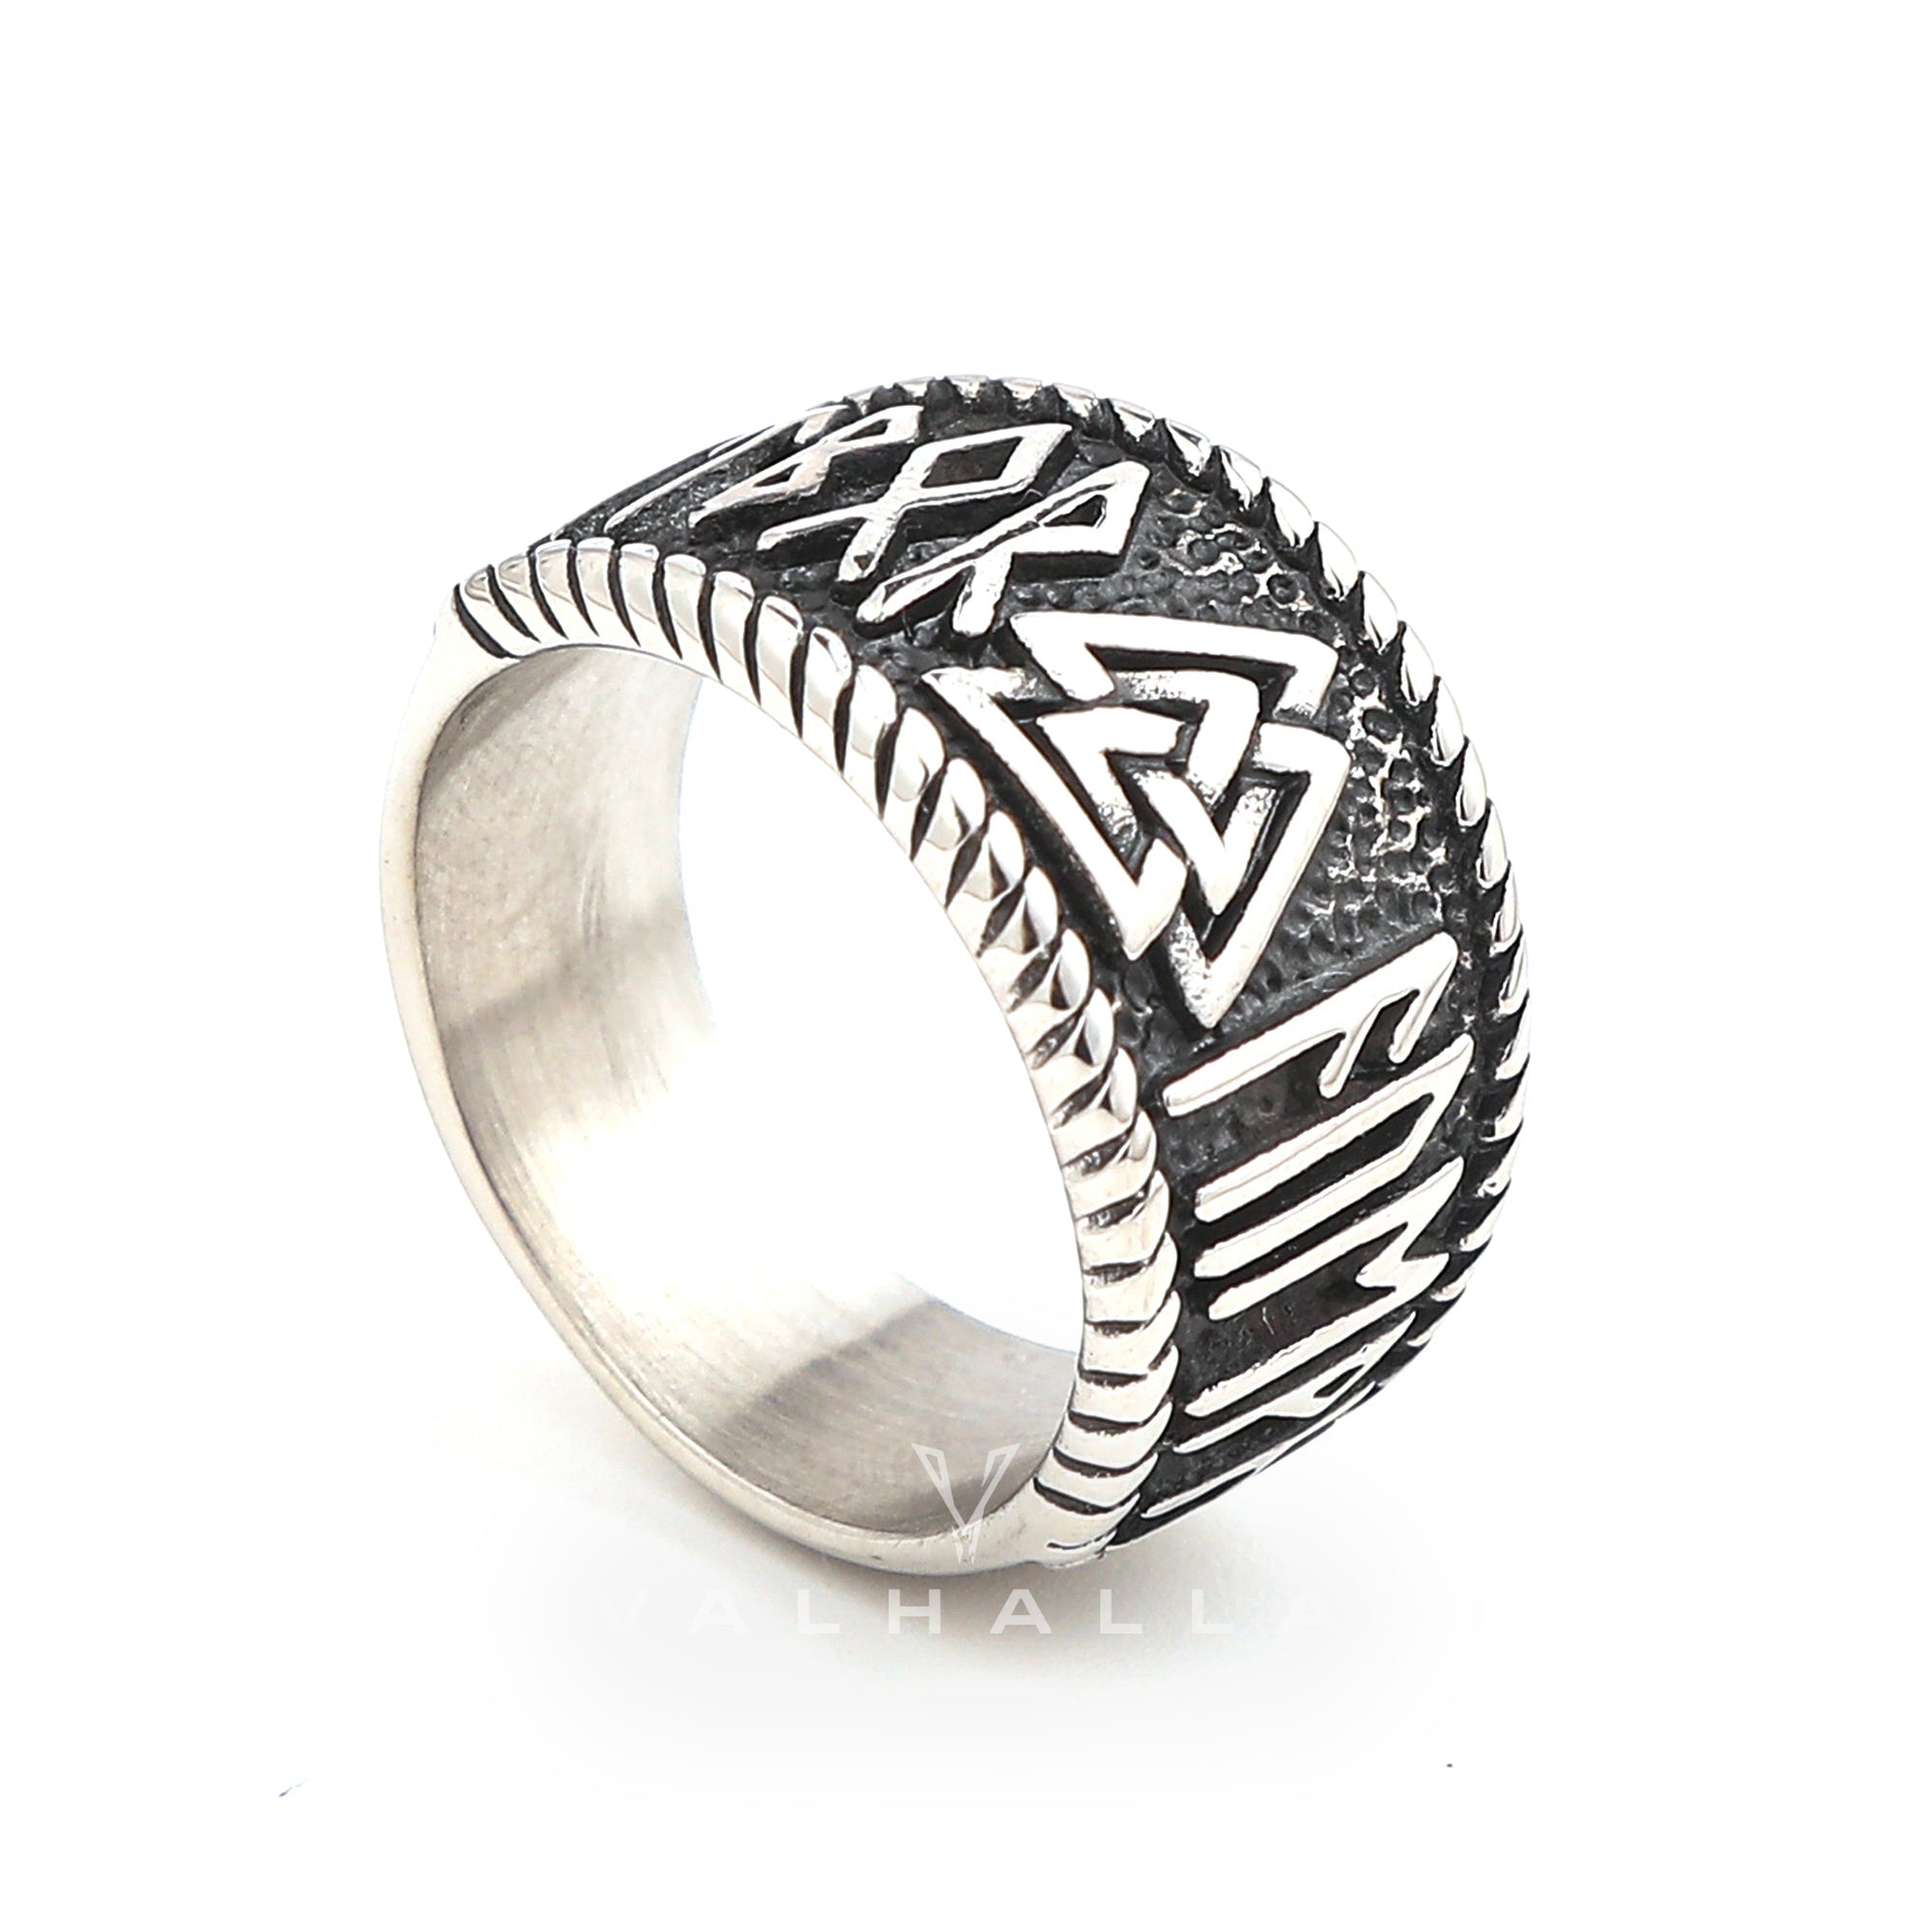 Handcrafted Stainless Steel Valknut and Rune Ring